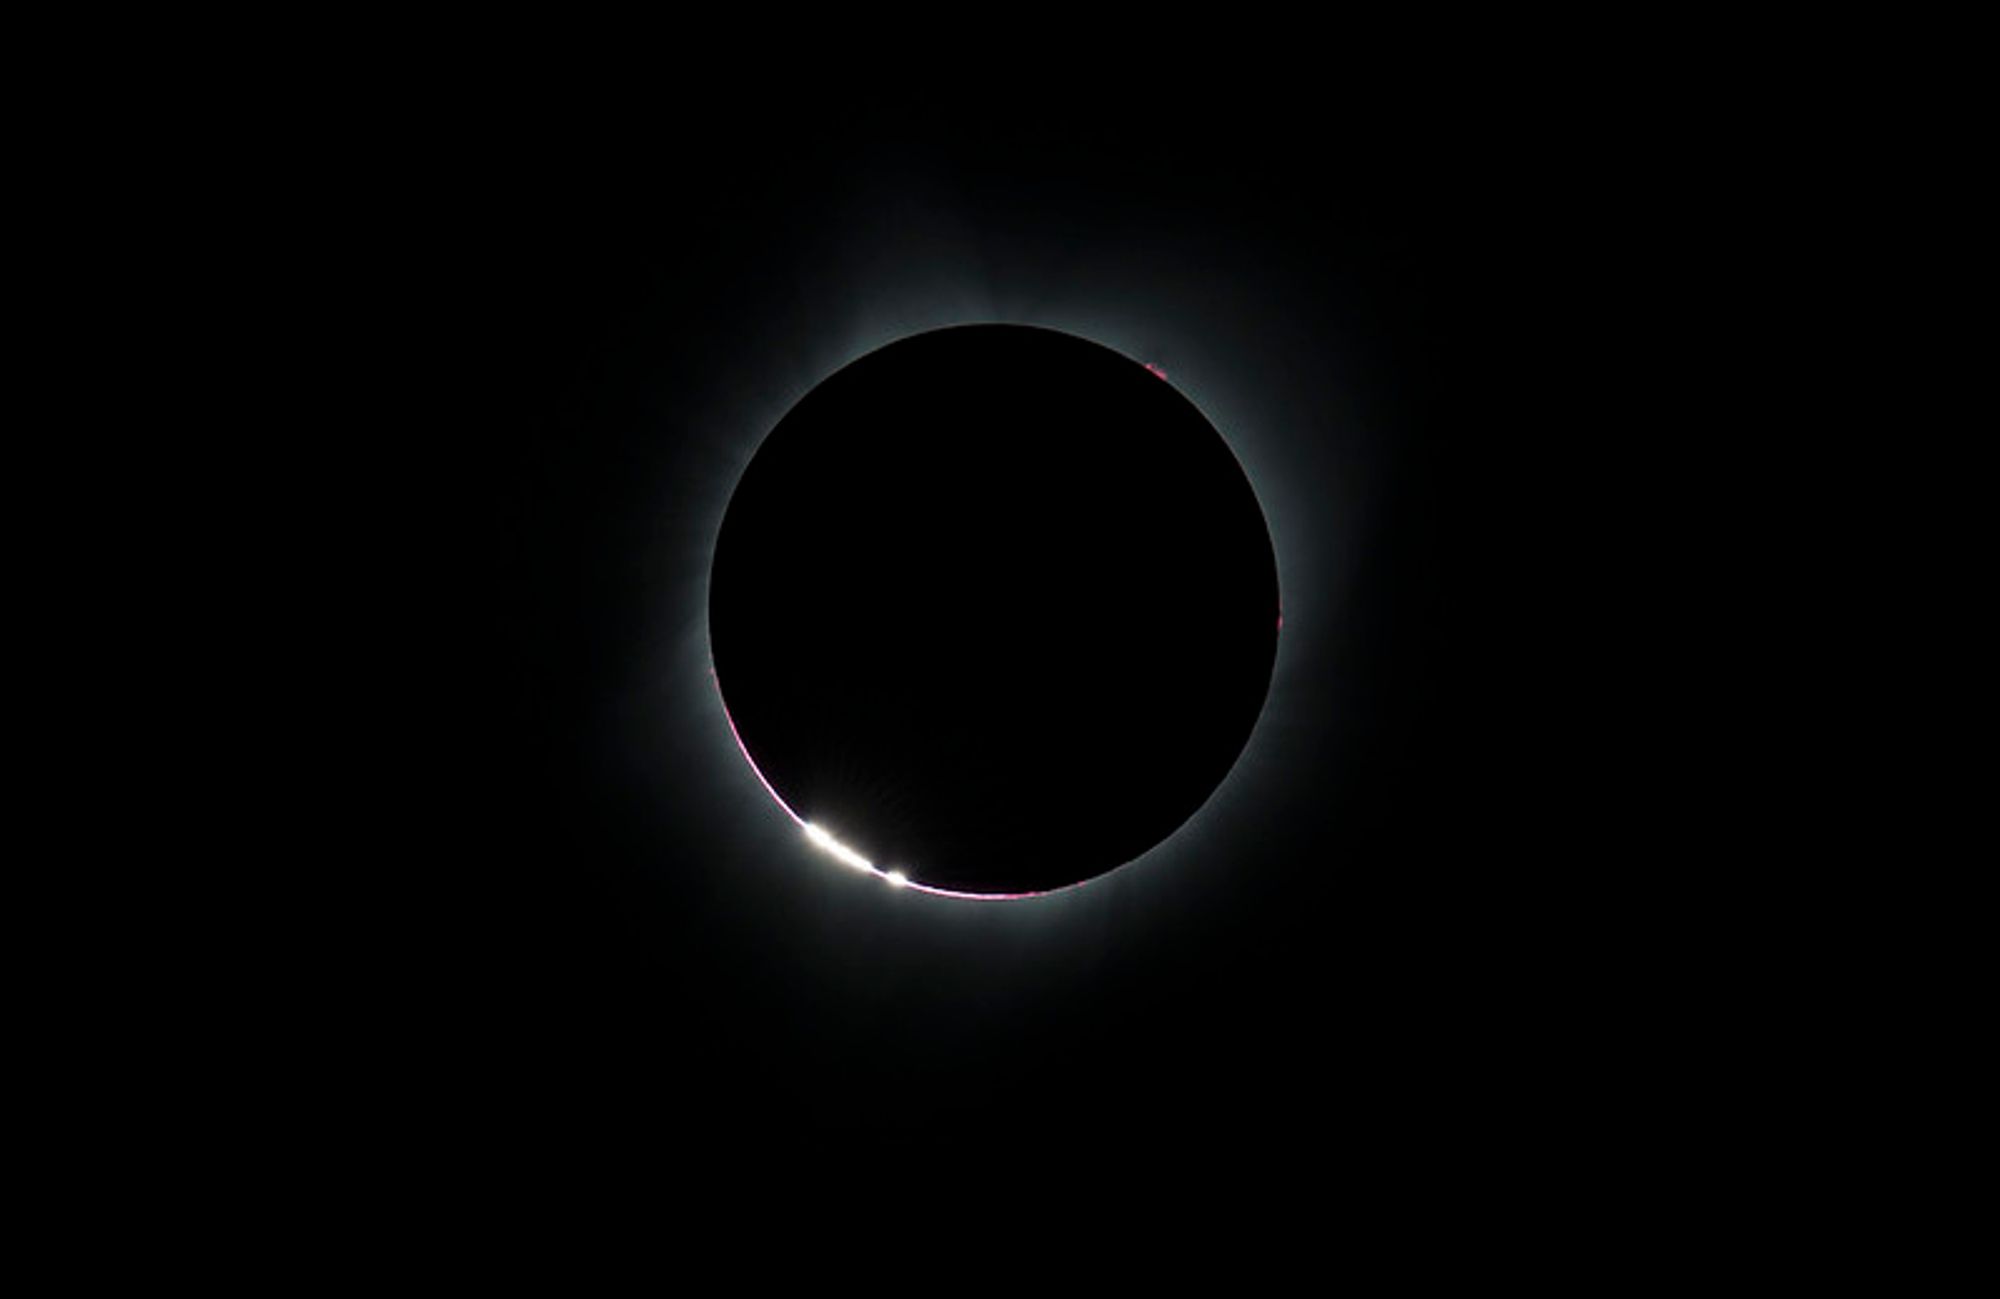 Baily’s Beads visible during a solar eclipse